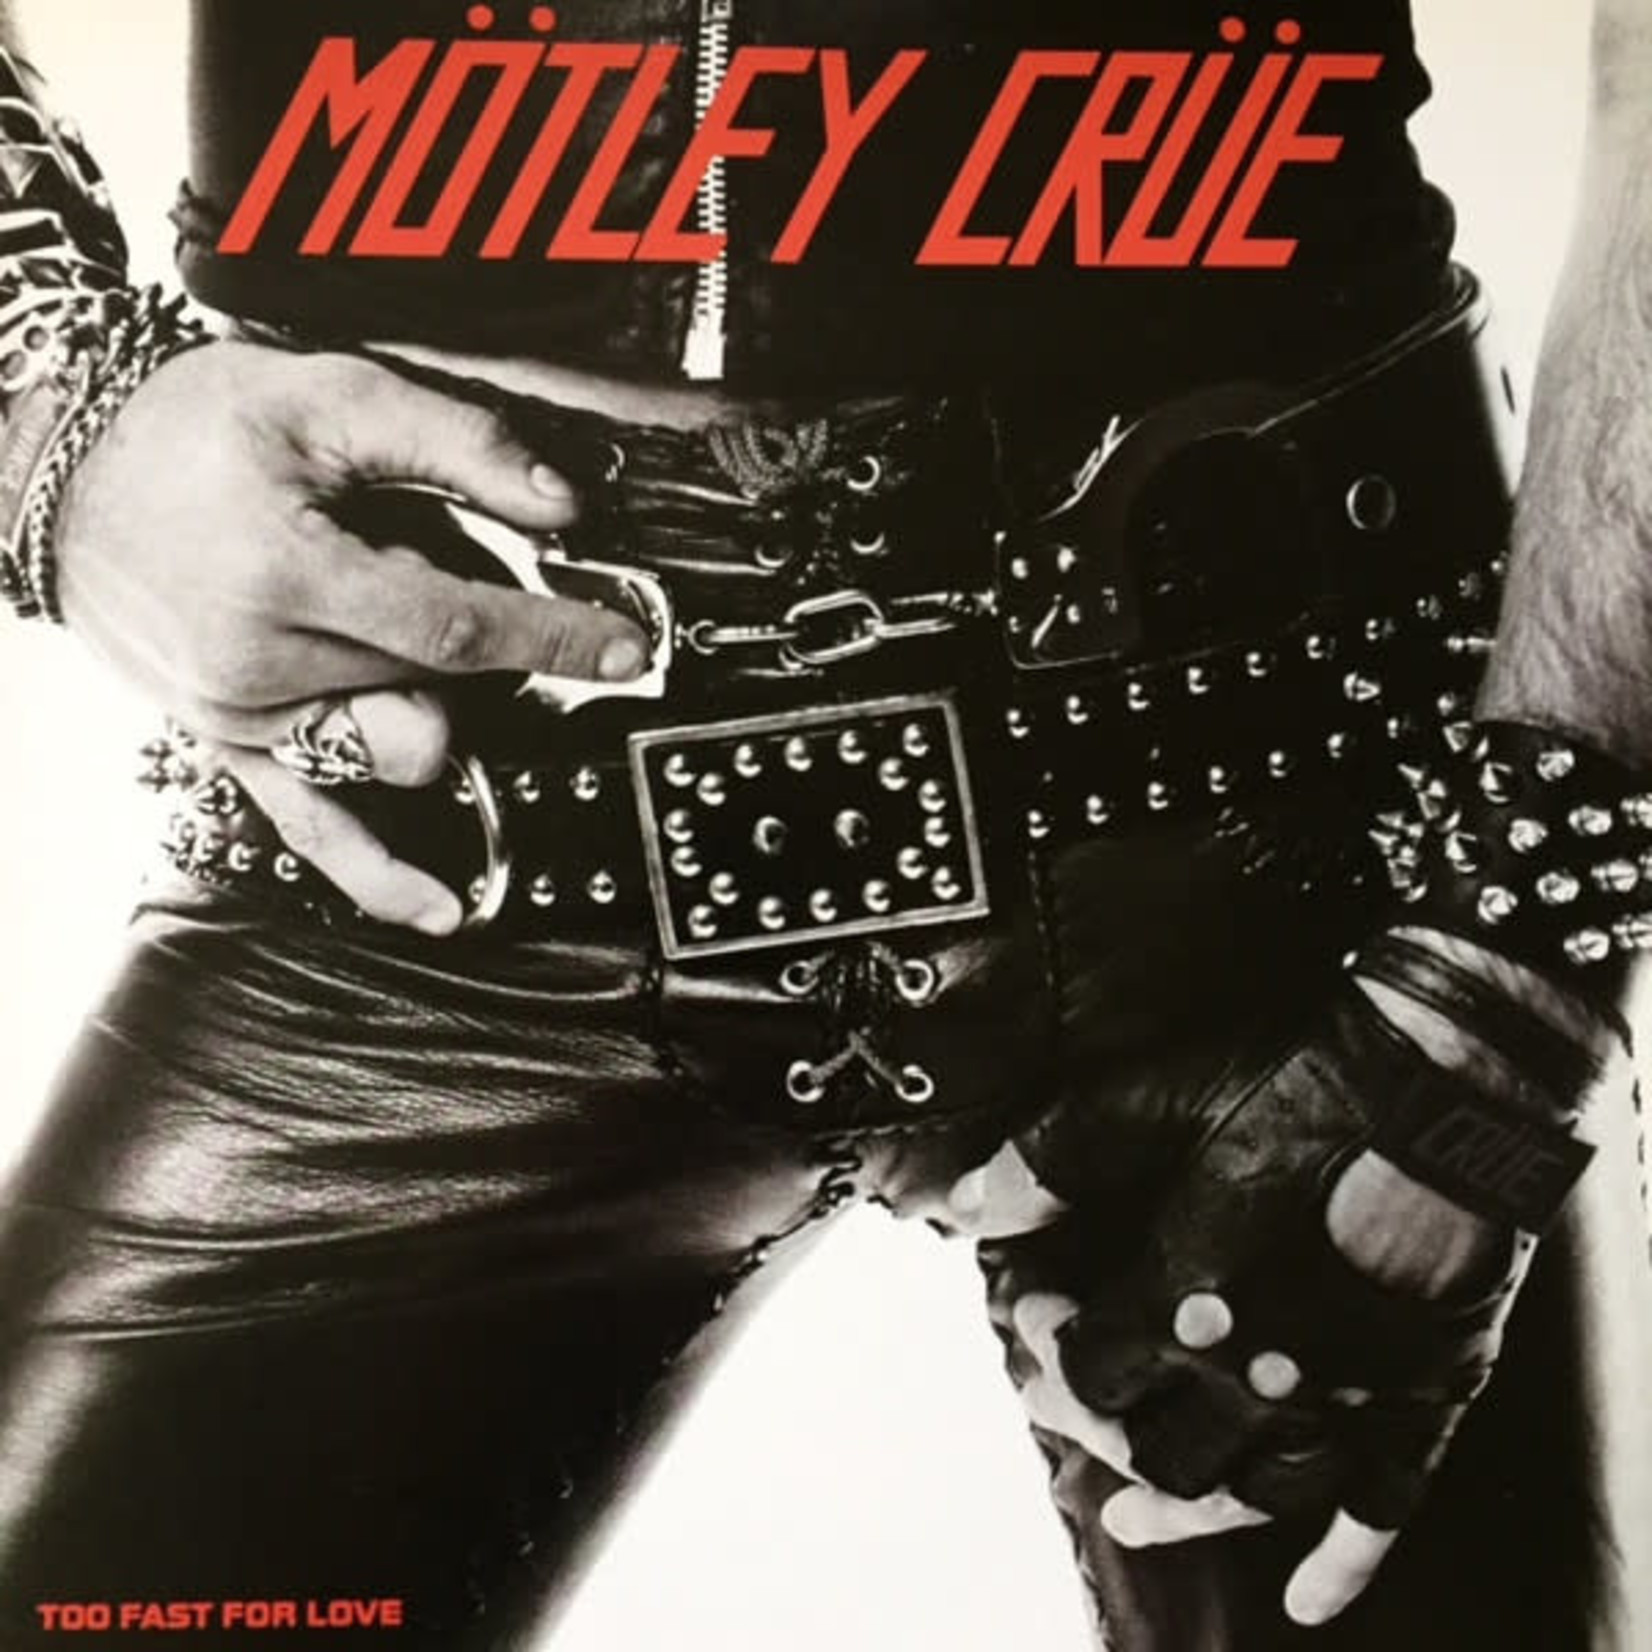 [Vintage] Motley Crue - Too Fast for Love (reissue, no insert)